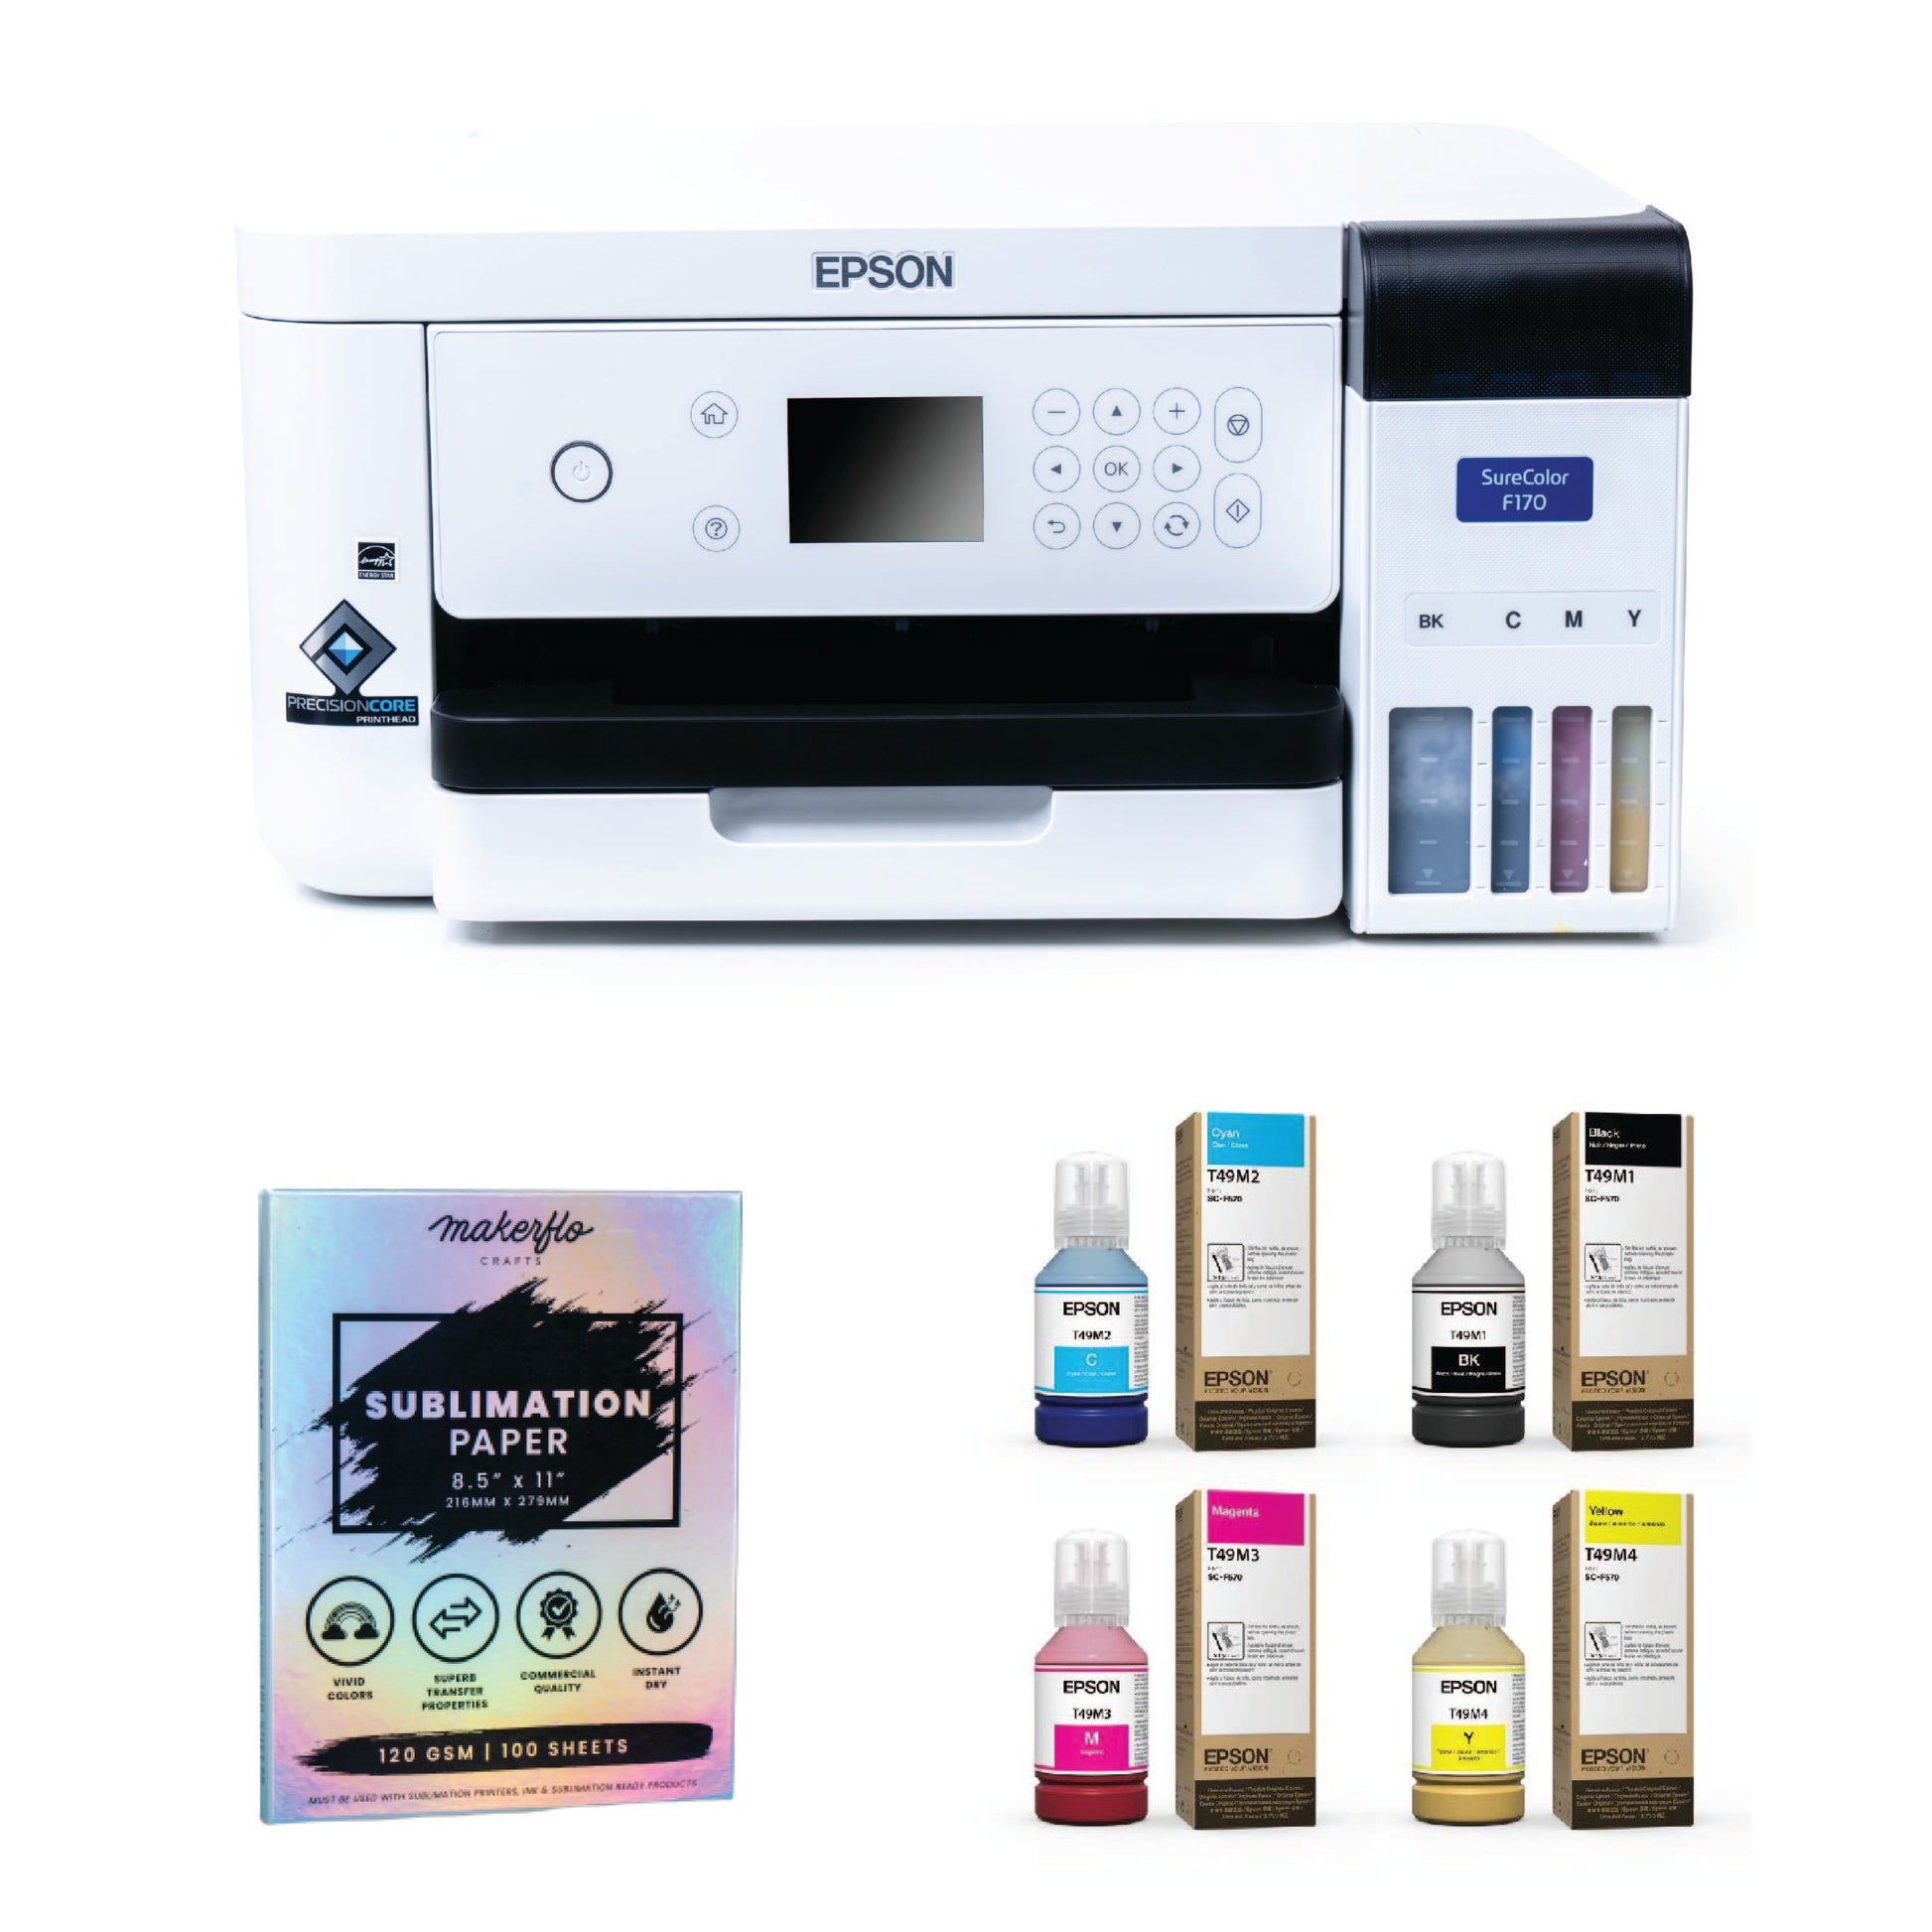 Dye-Sublimation Ink for Epson F570 & F170